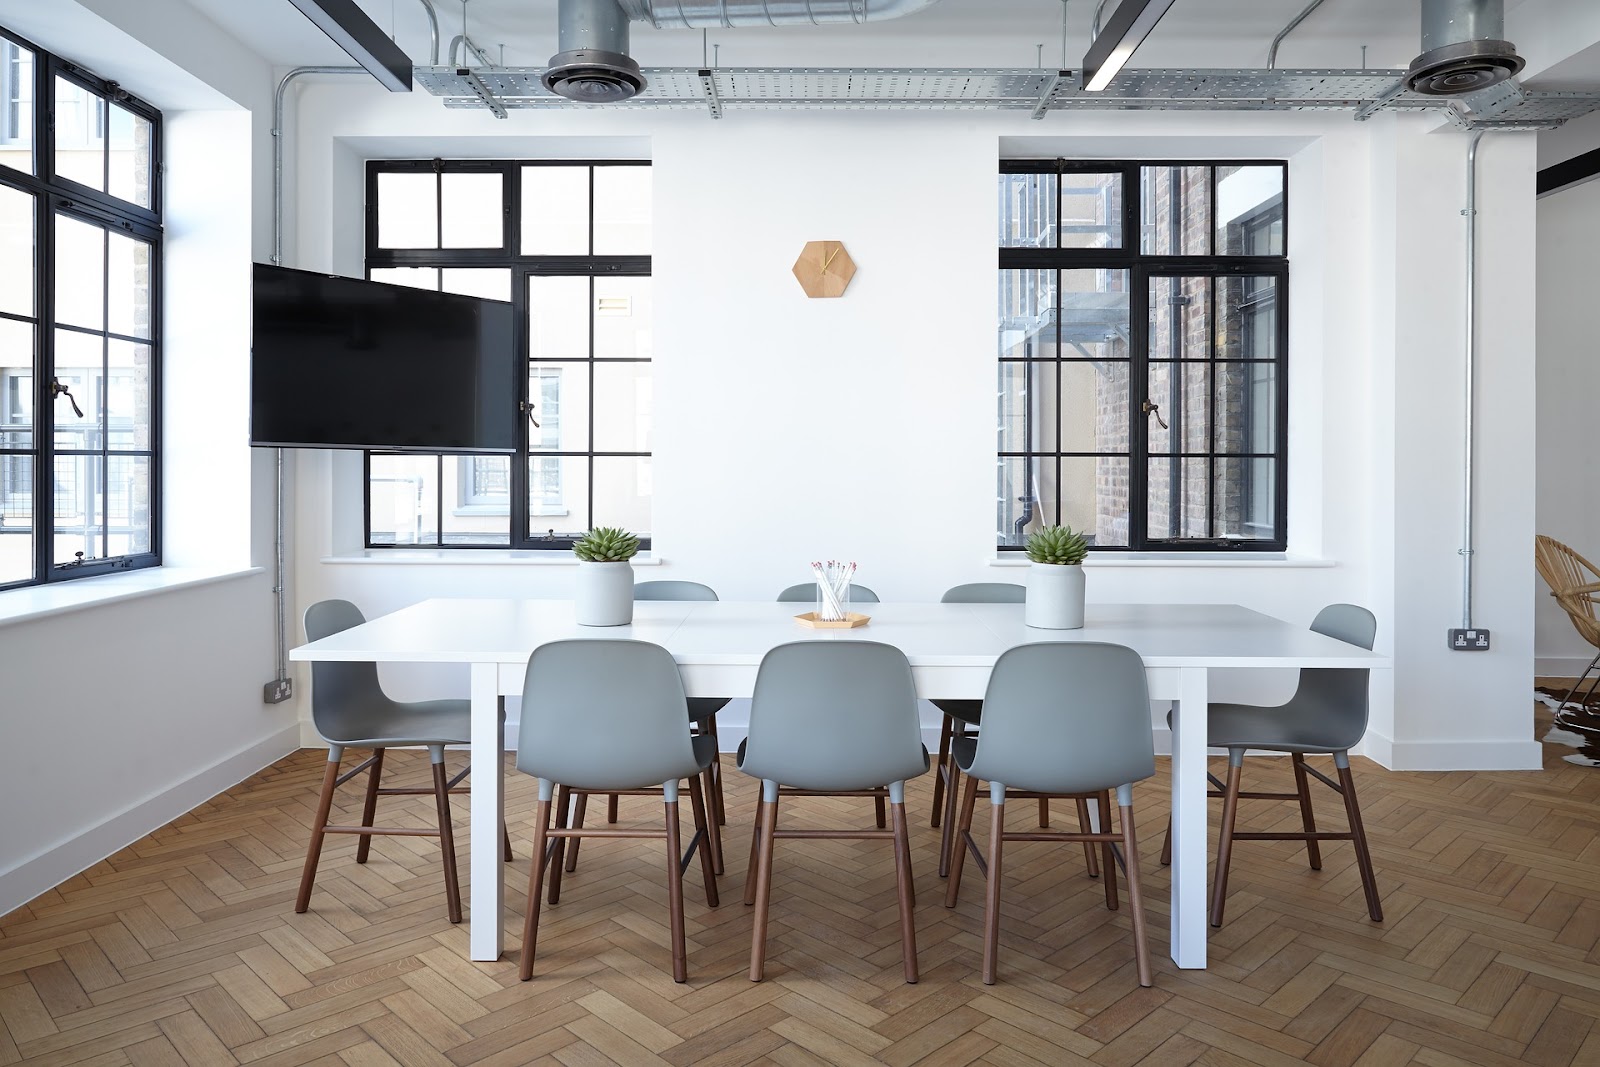 The Benefits of a Clean Home or Office